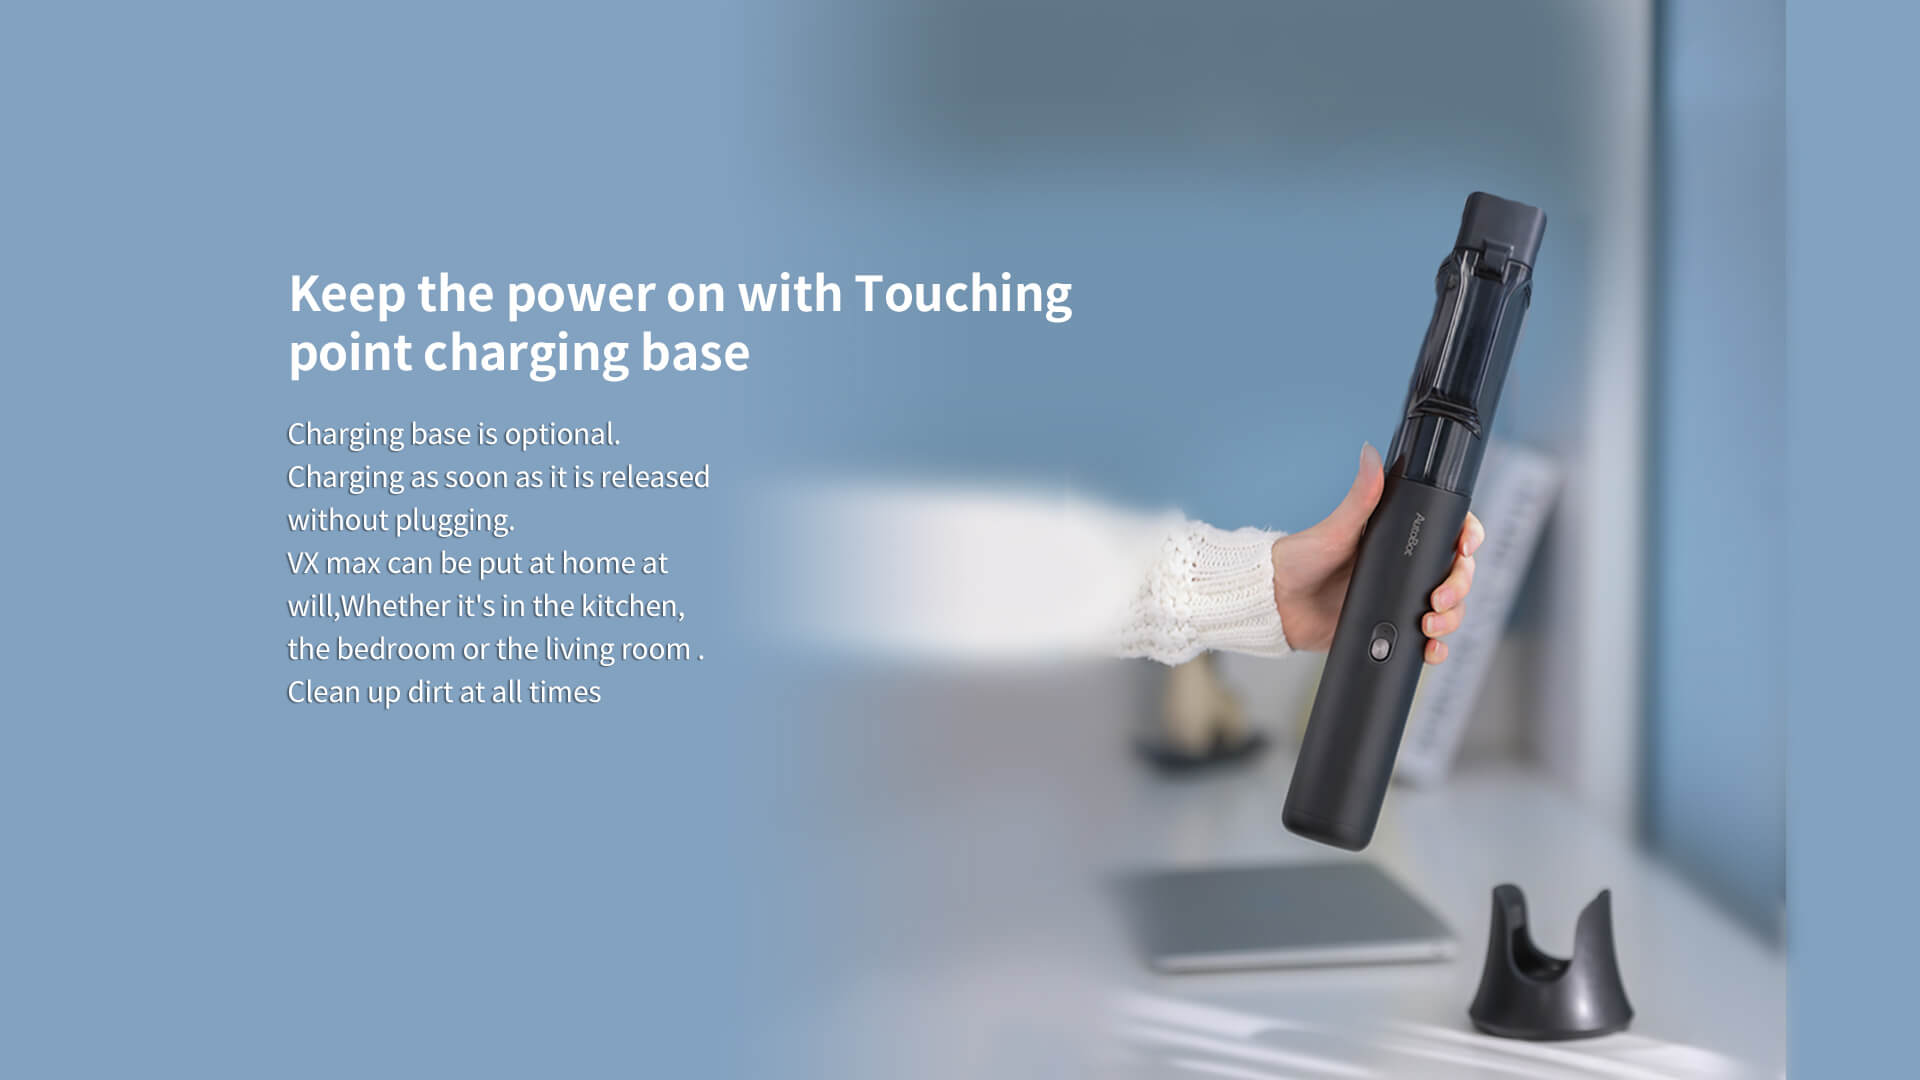 Keep the power on with touching point charging base, charging base is optionalcharging as soon as it is released without plugging.